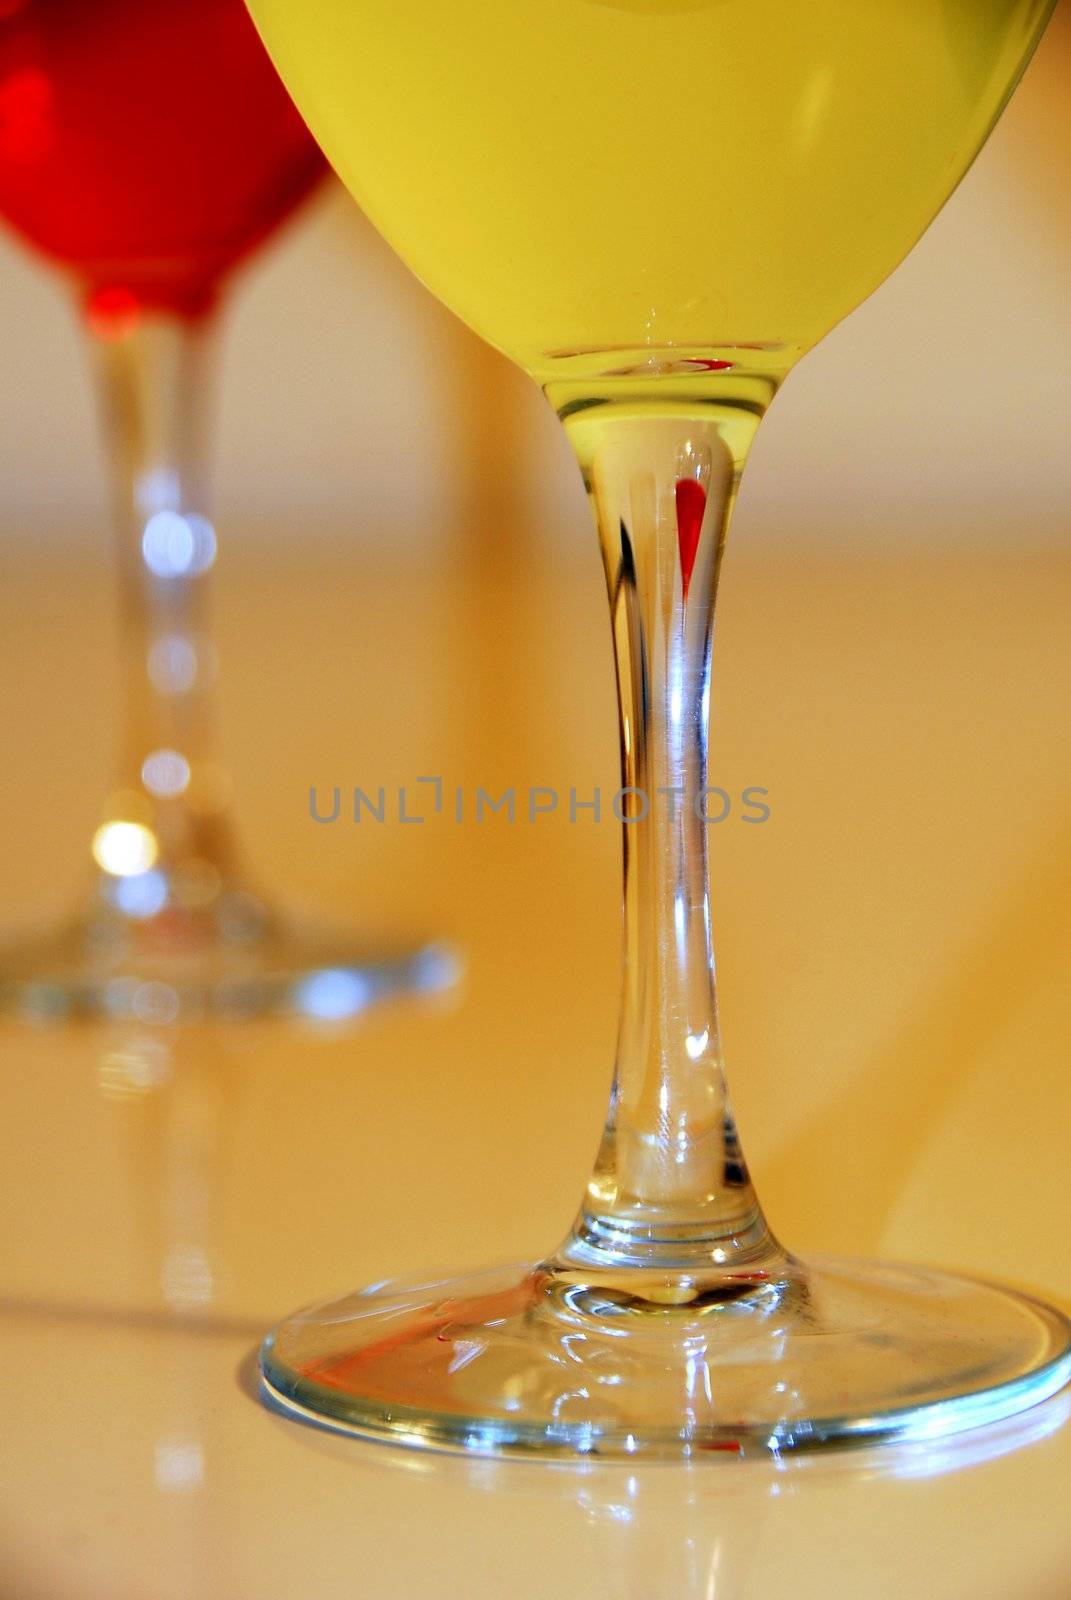 Celebrate with Drinks in Wine Glasses by nikonite